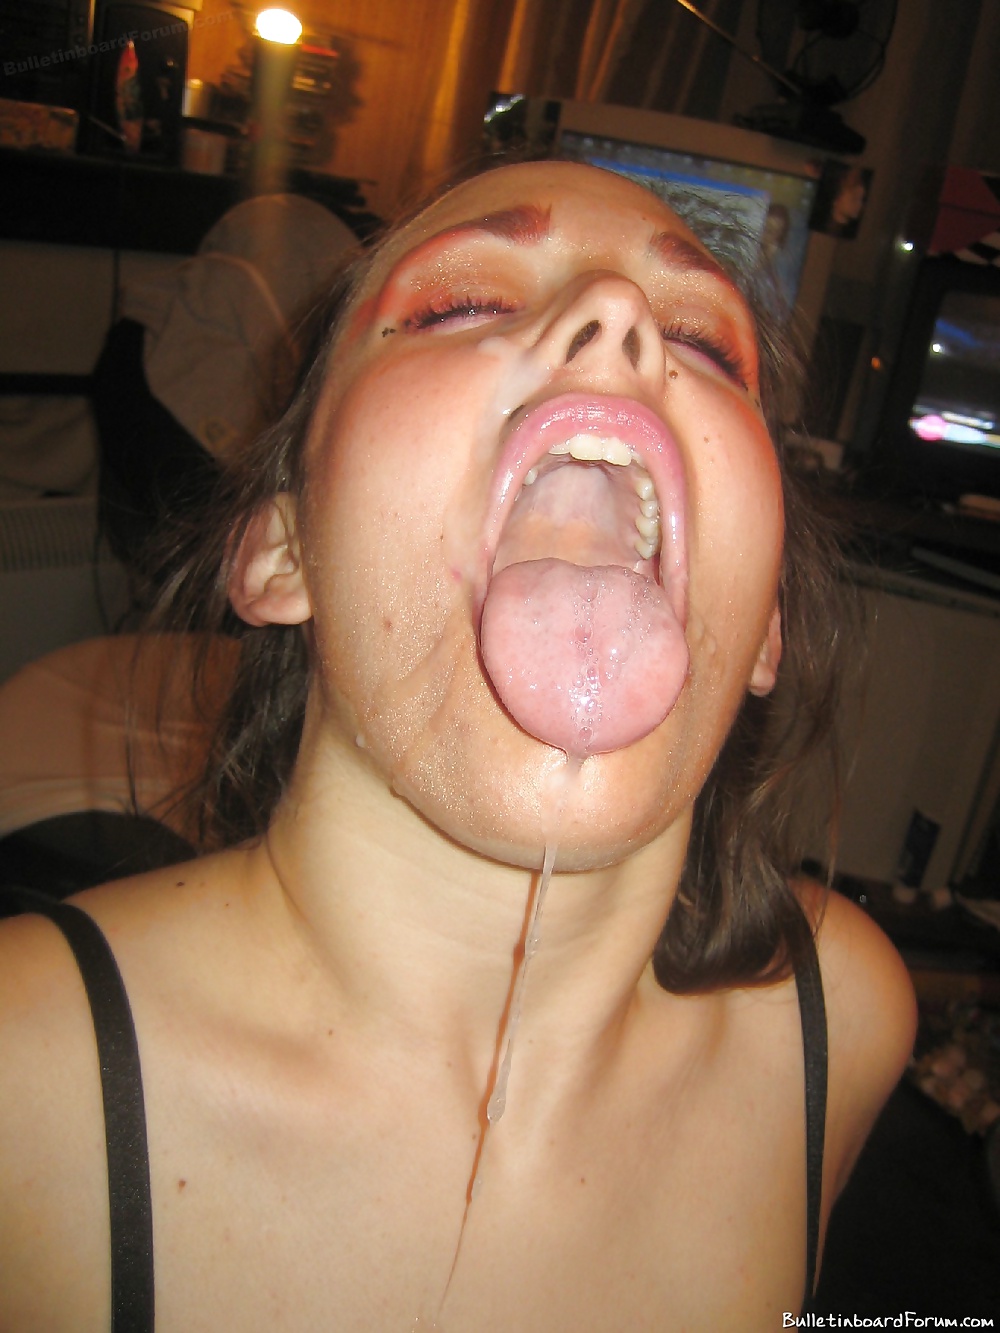 Mouth Open And Tongue Out Ready For Cum Pics Xhamster 8056 | Hot Sex Picture